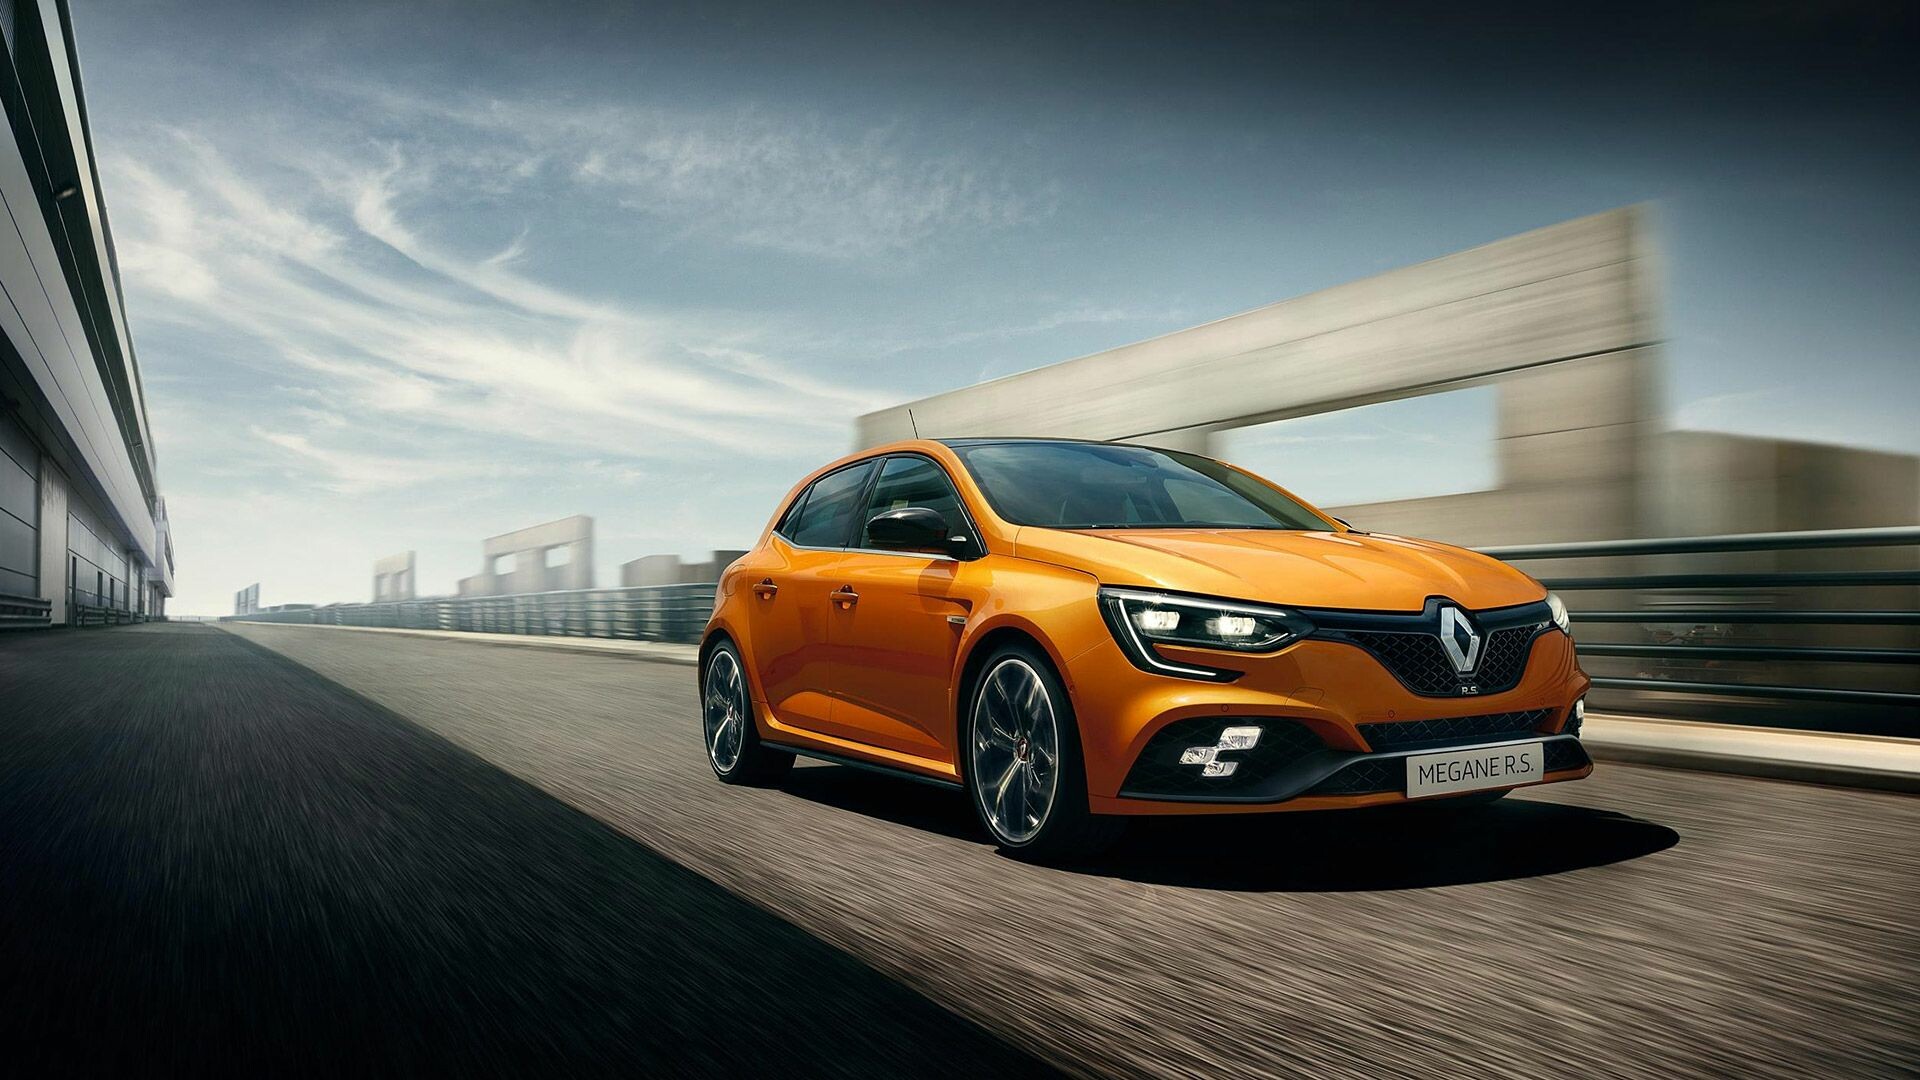 Renault: Megane RS, A French multinational automobile company. 1920x1080 Full HD Background.